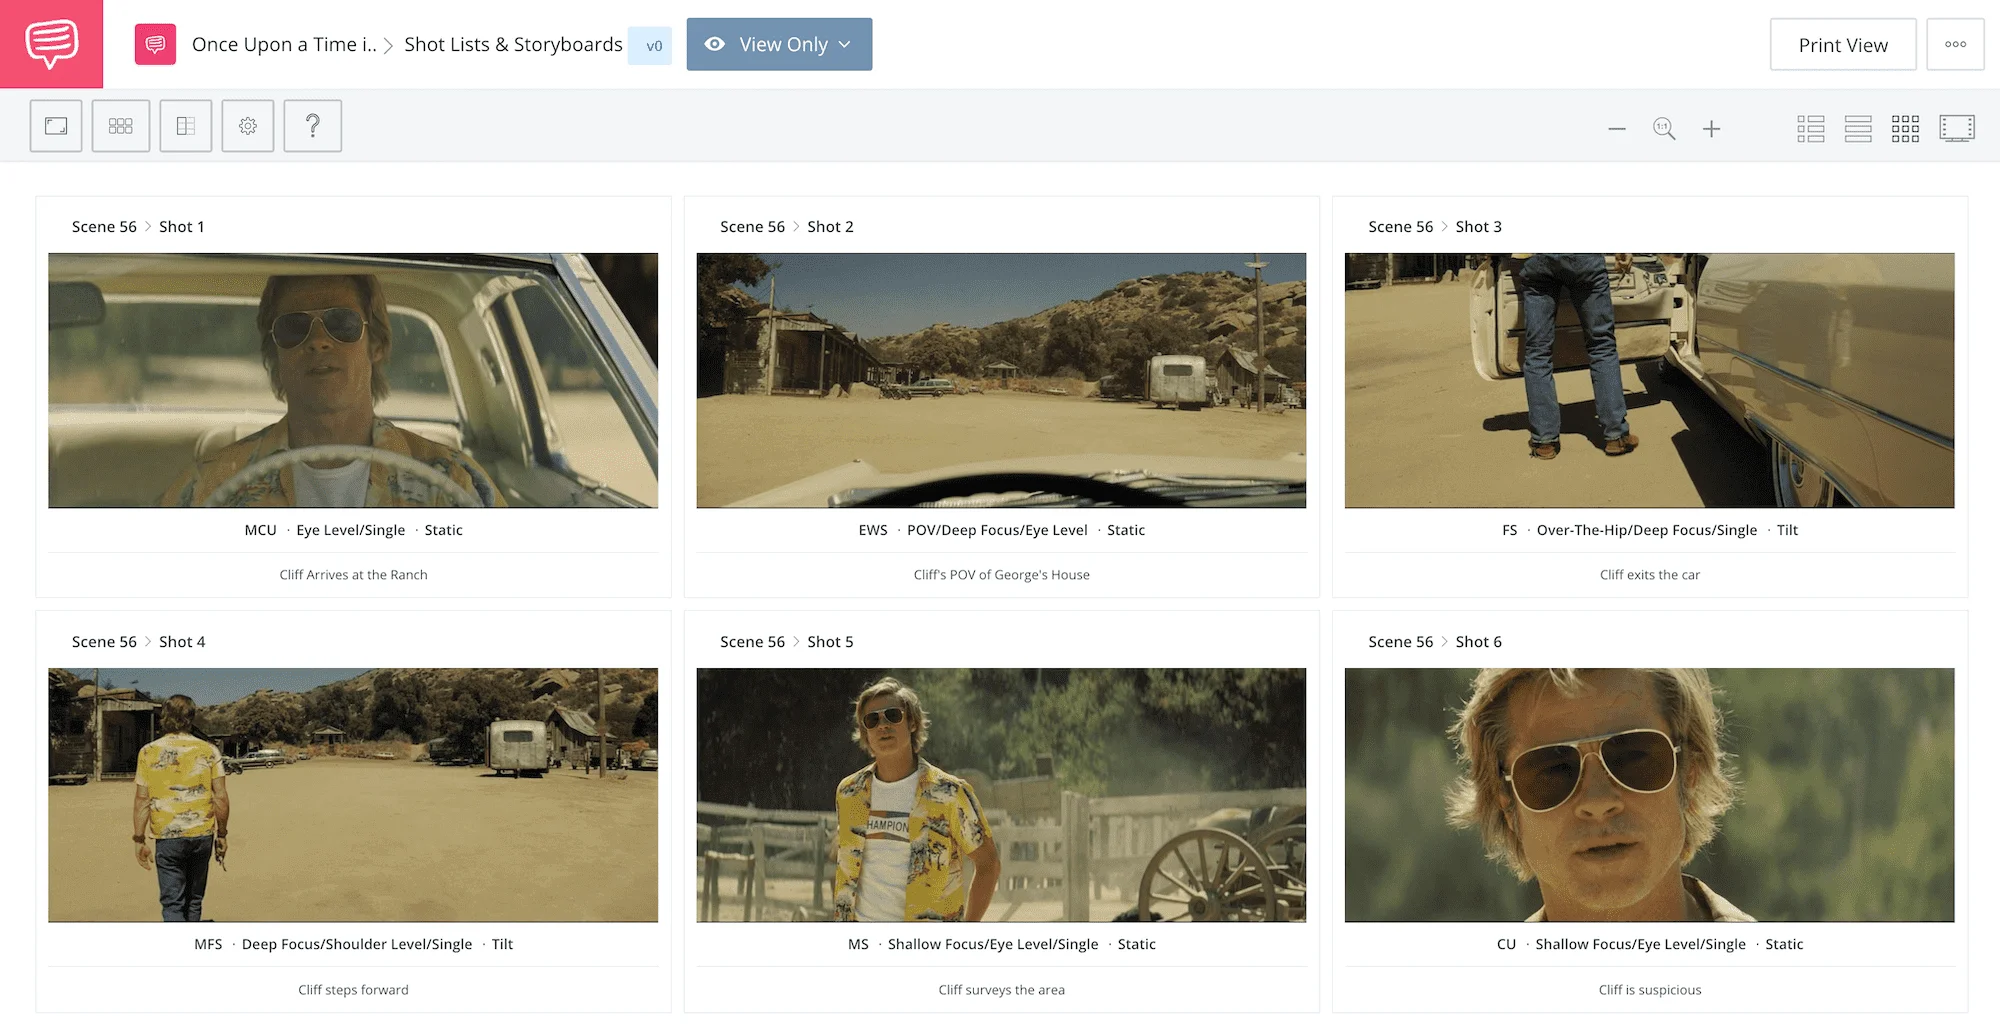 Once Upon a Time in Hollywood Analysis - Spahn Ranch Sequence - StudioBinder Storyboard Software